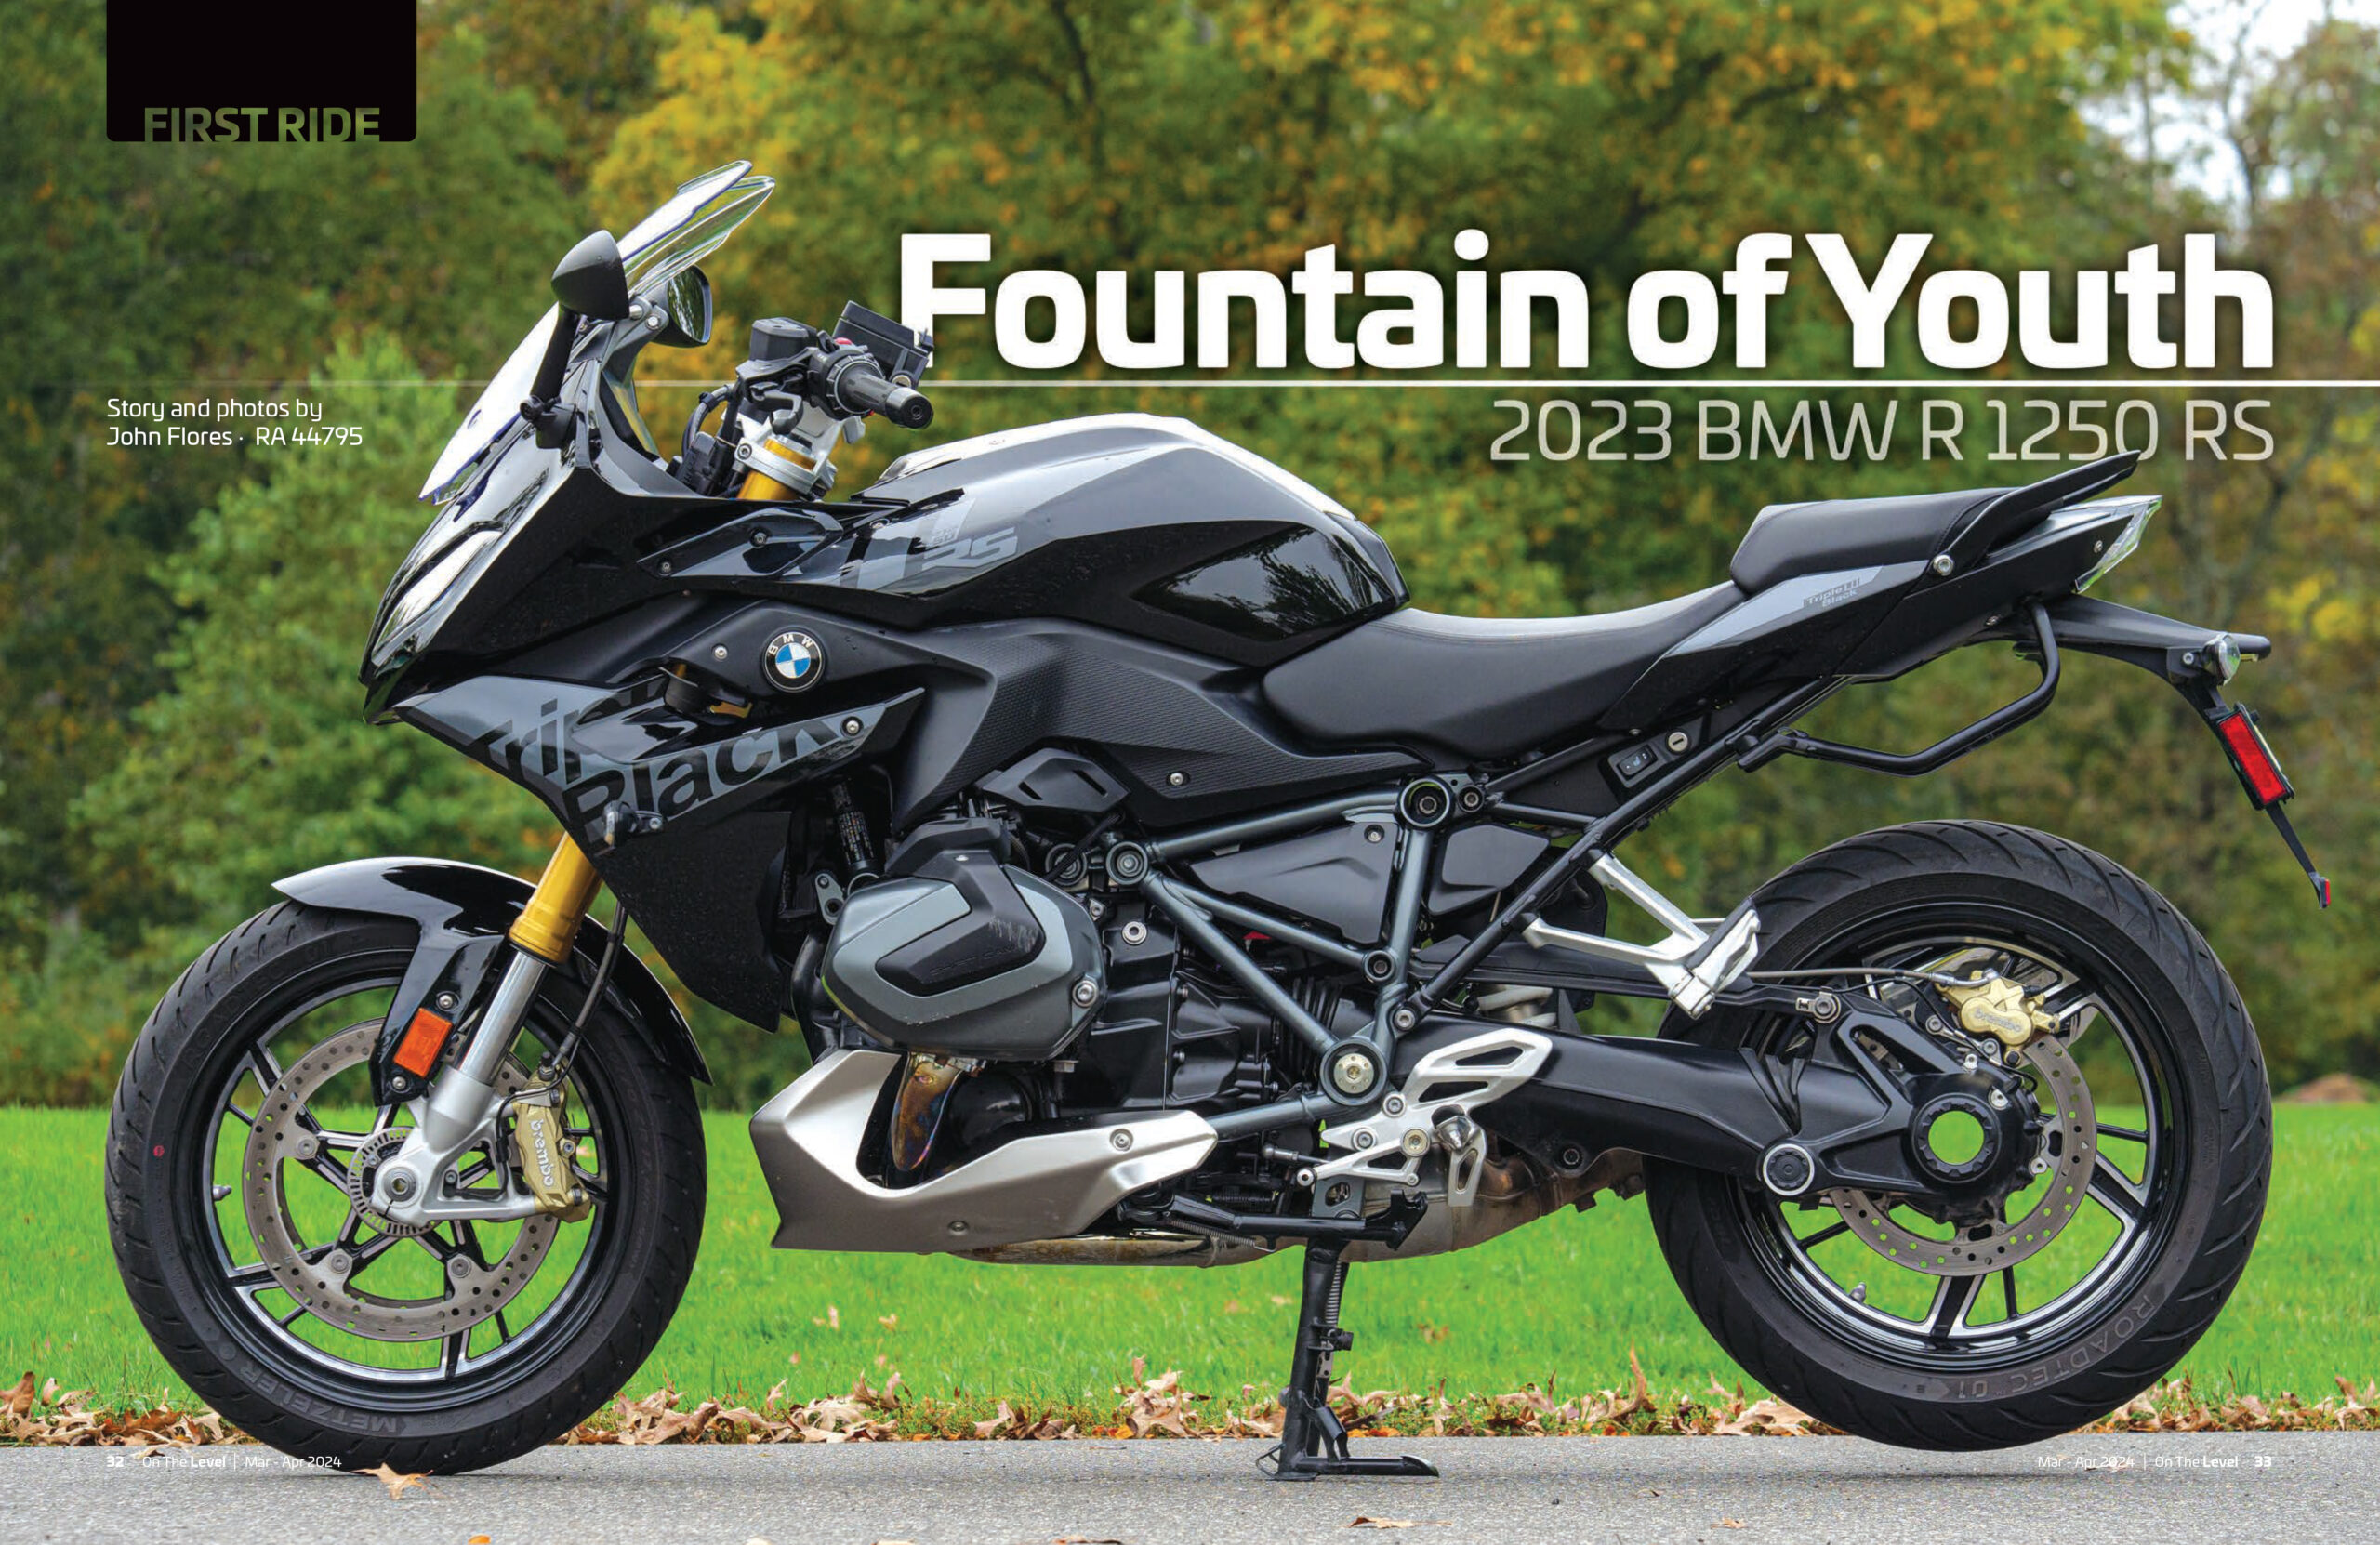 2023 BMW R 1250 RS story published in “On The Level”